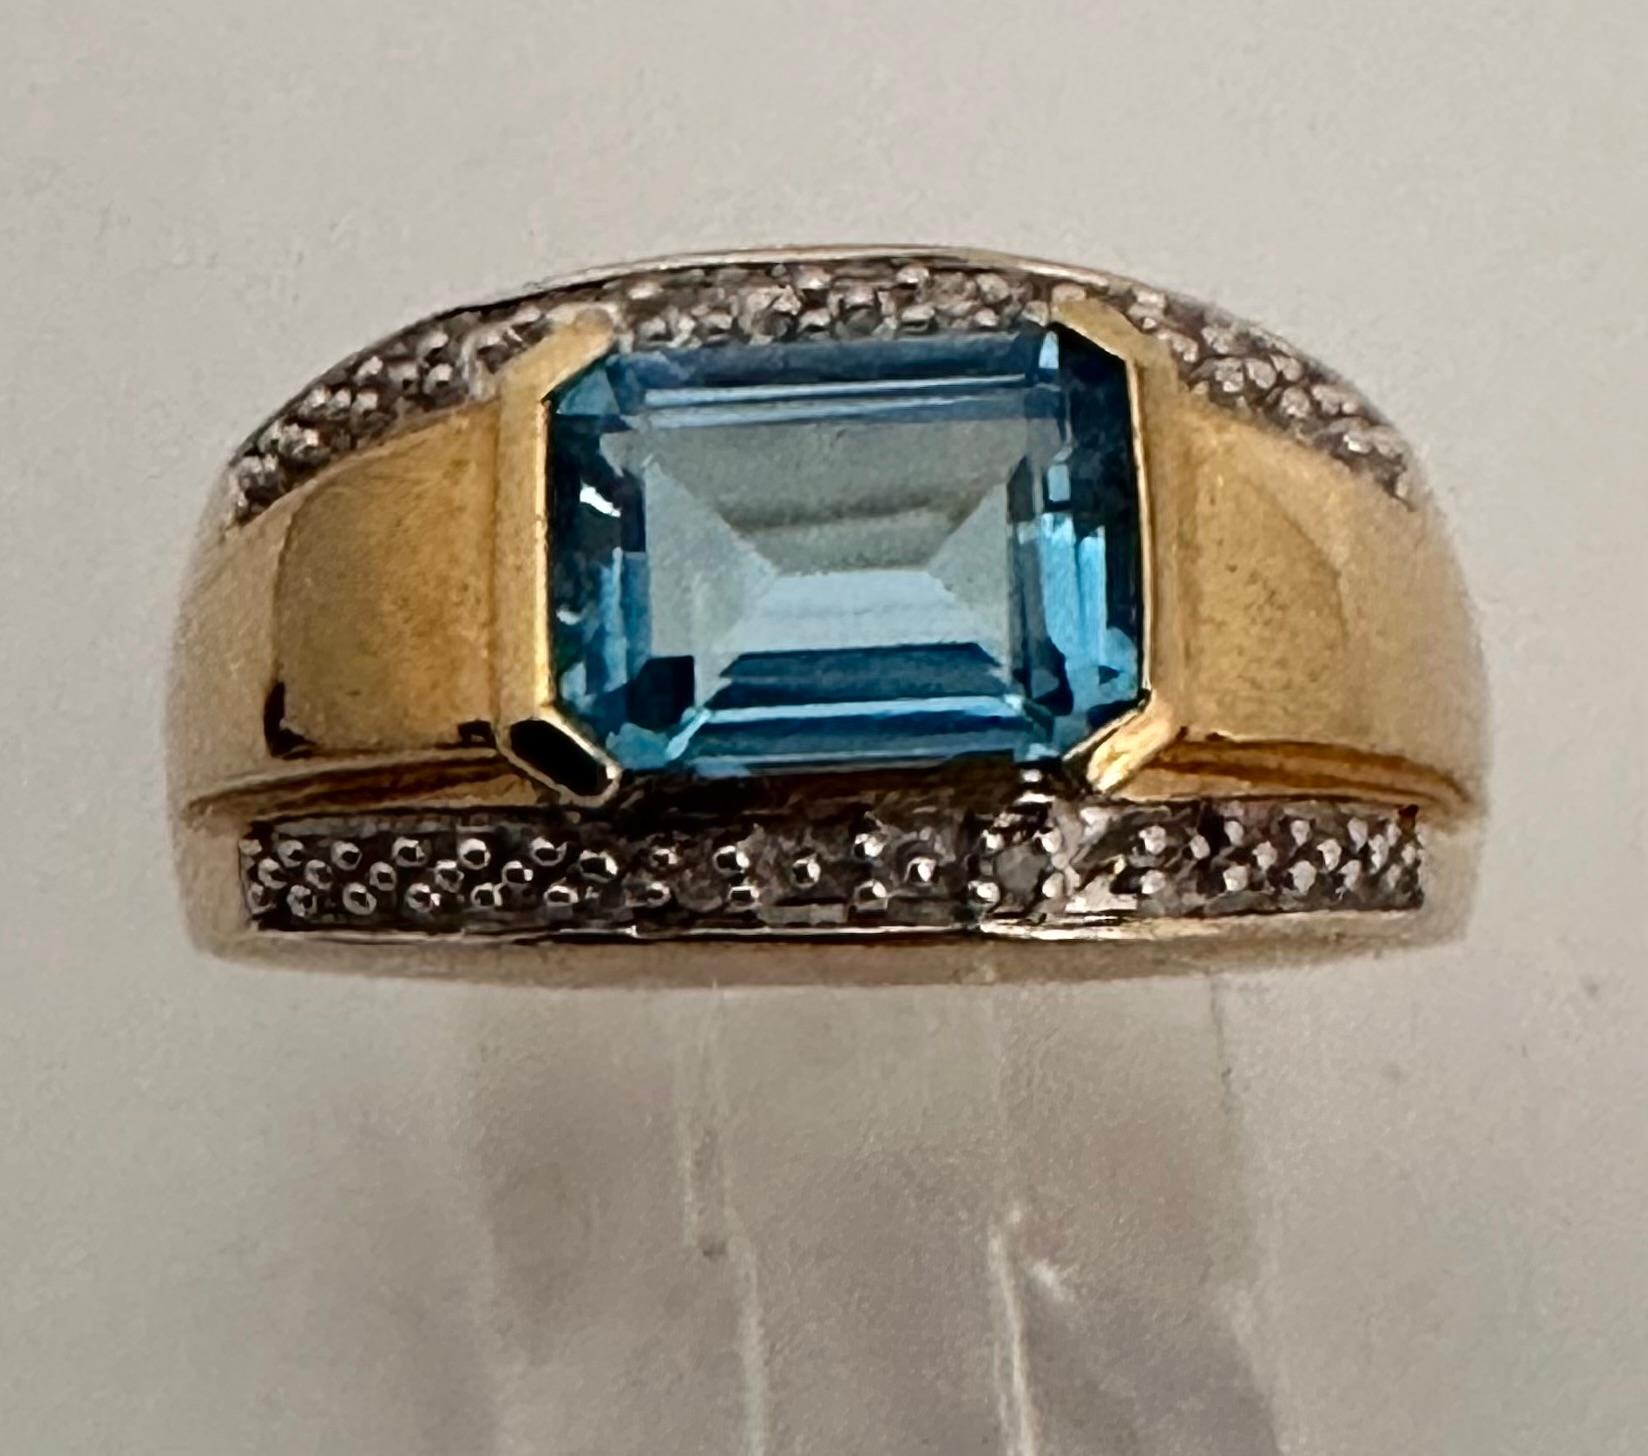 10k Yellow Gold 6mm x 8mm Emerald Cut Blue Topaz Diamond Ring Size 7 For Sale 5